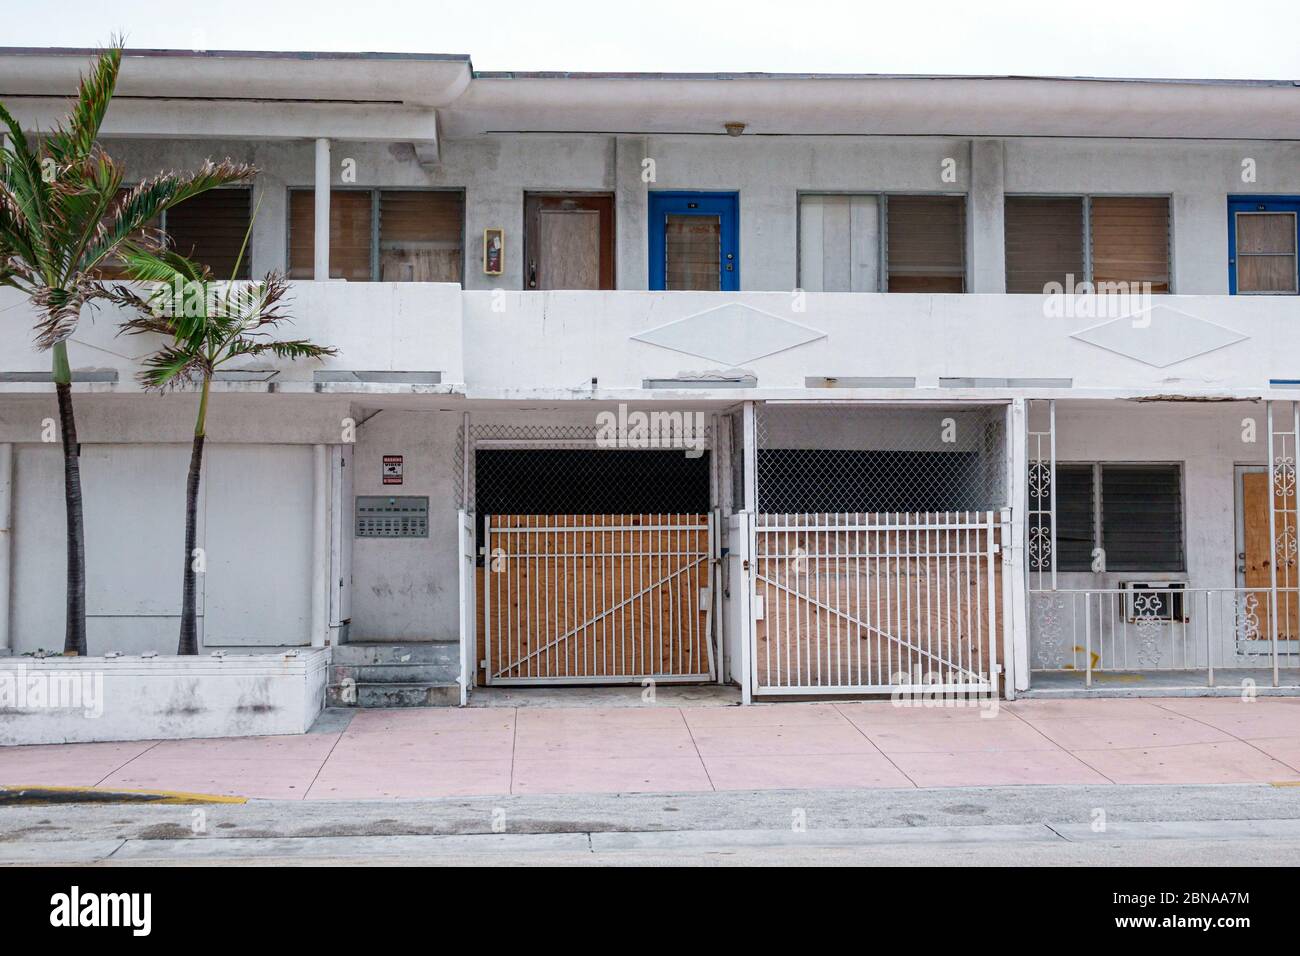 Miami Beach Florida,North Beach,vacant blighted abandoned empty boarded up,former hotel hotels lodging inn motel motels,motel apartment building,visit Stock Photo